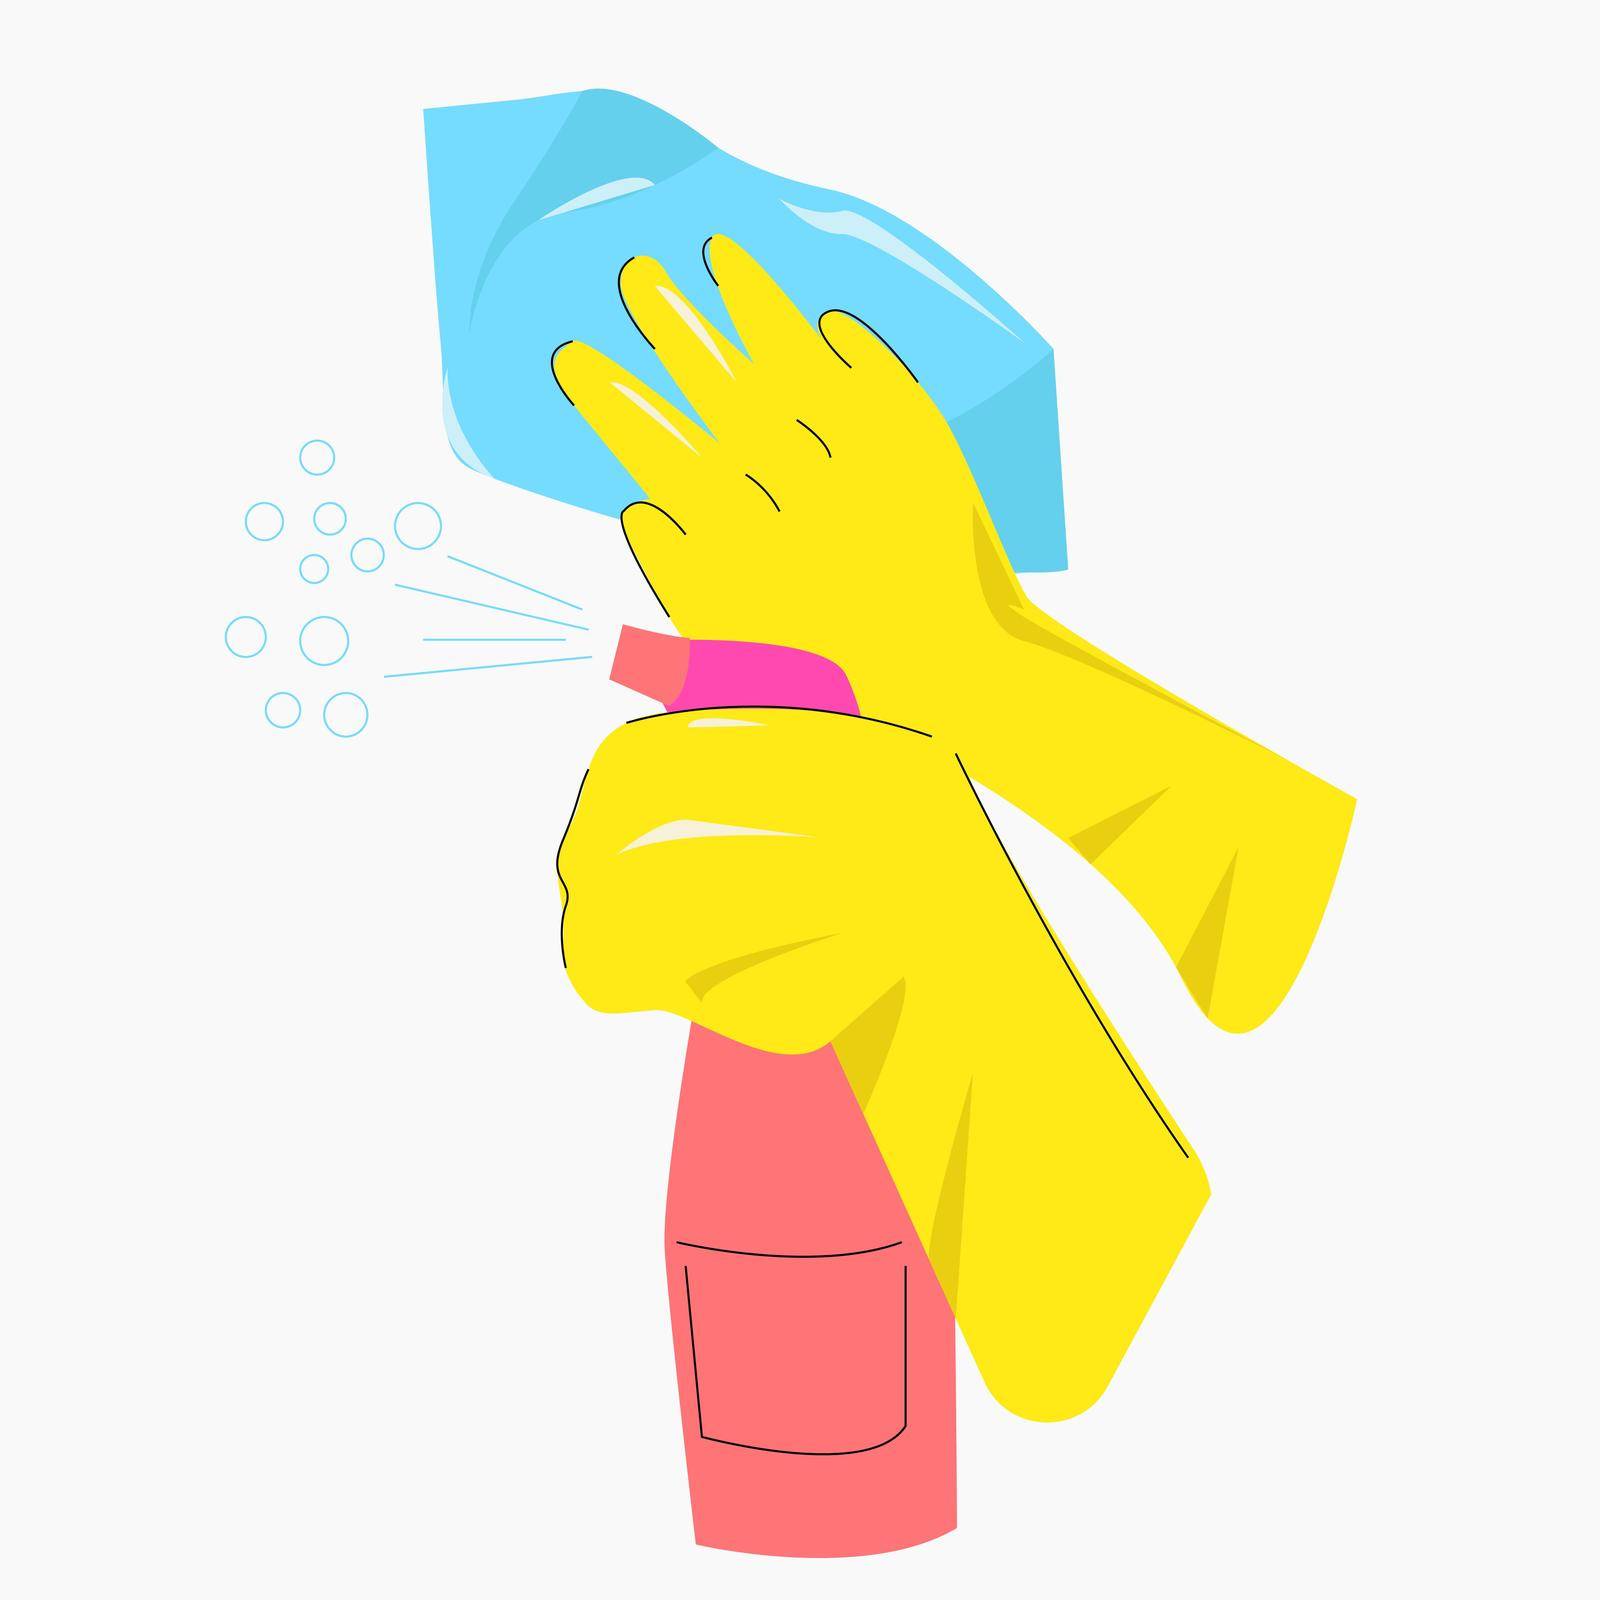 Hands with yellow gloves and a spray bottle. by EvgeniyaEgorova